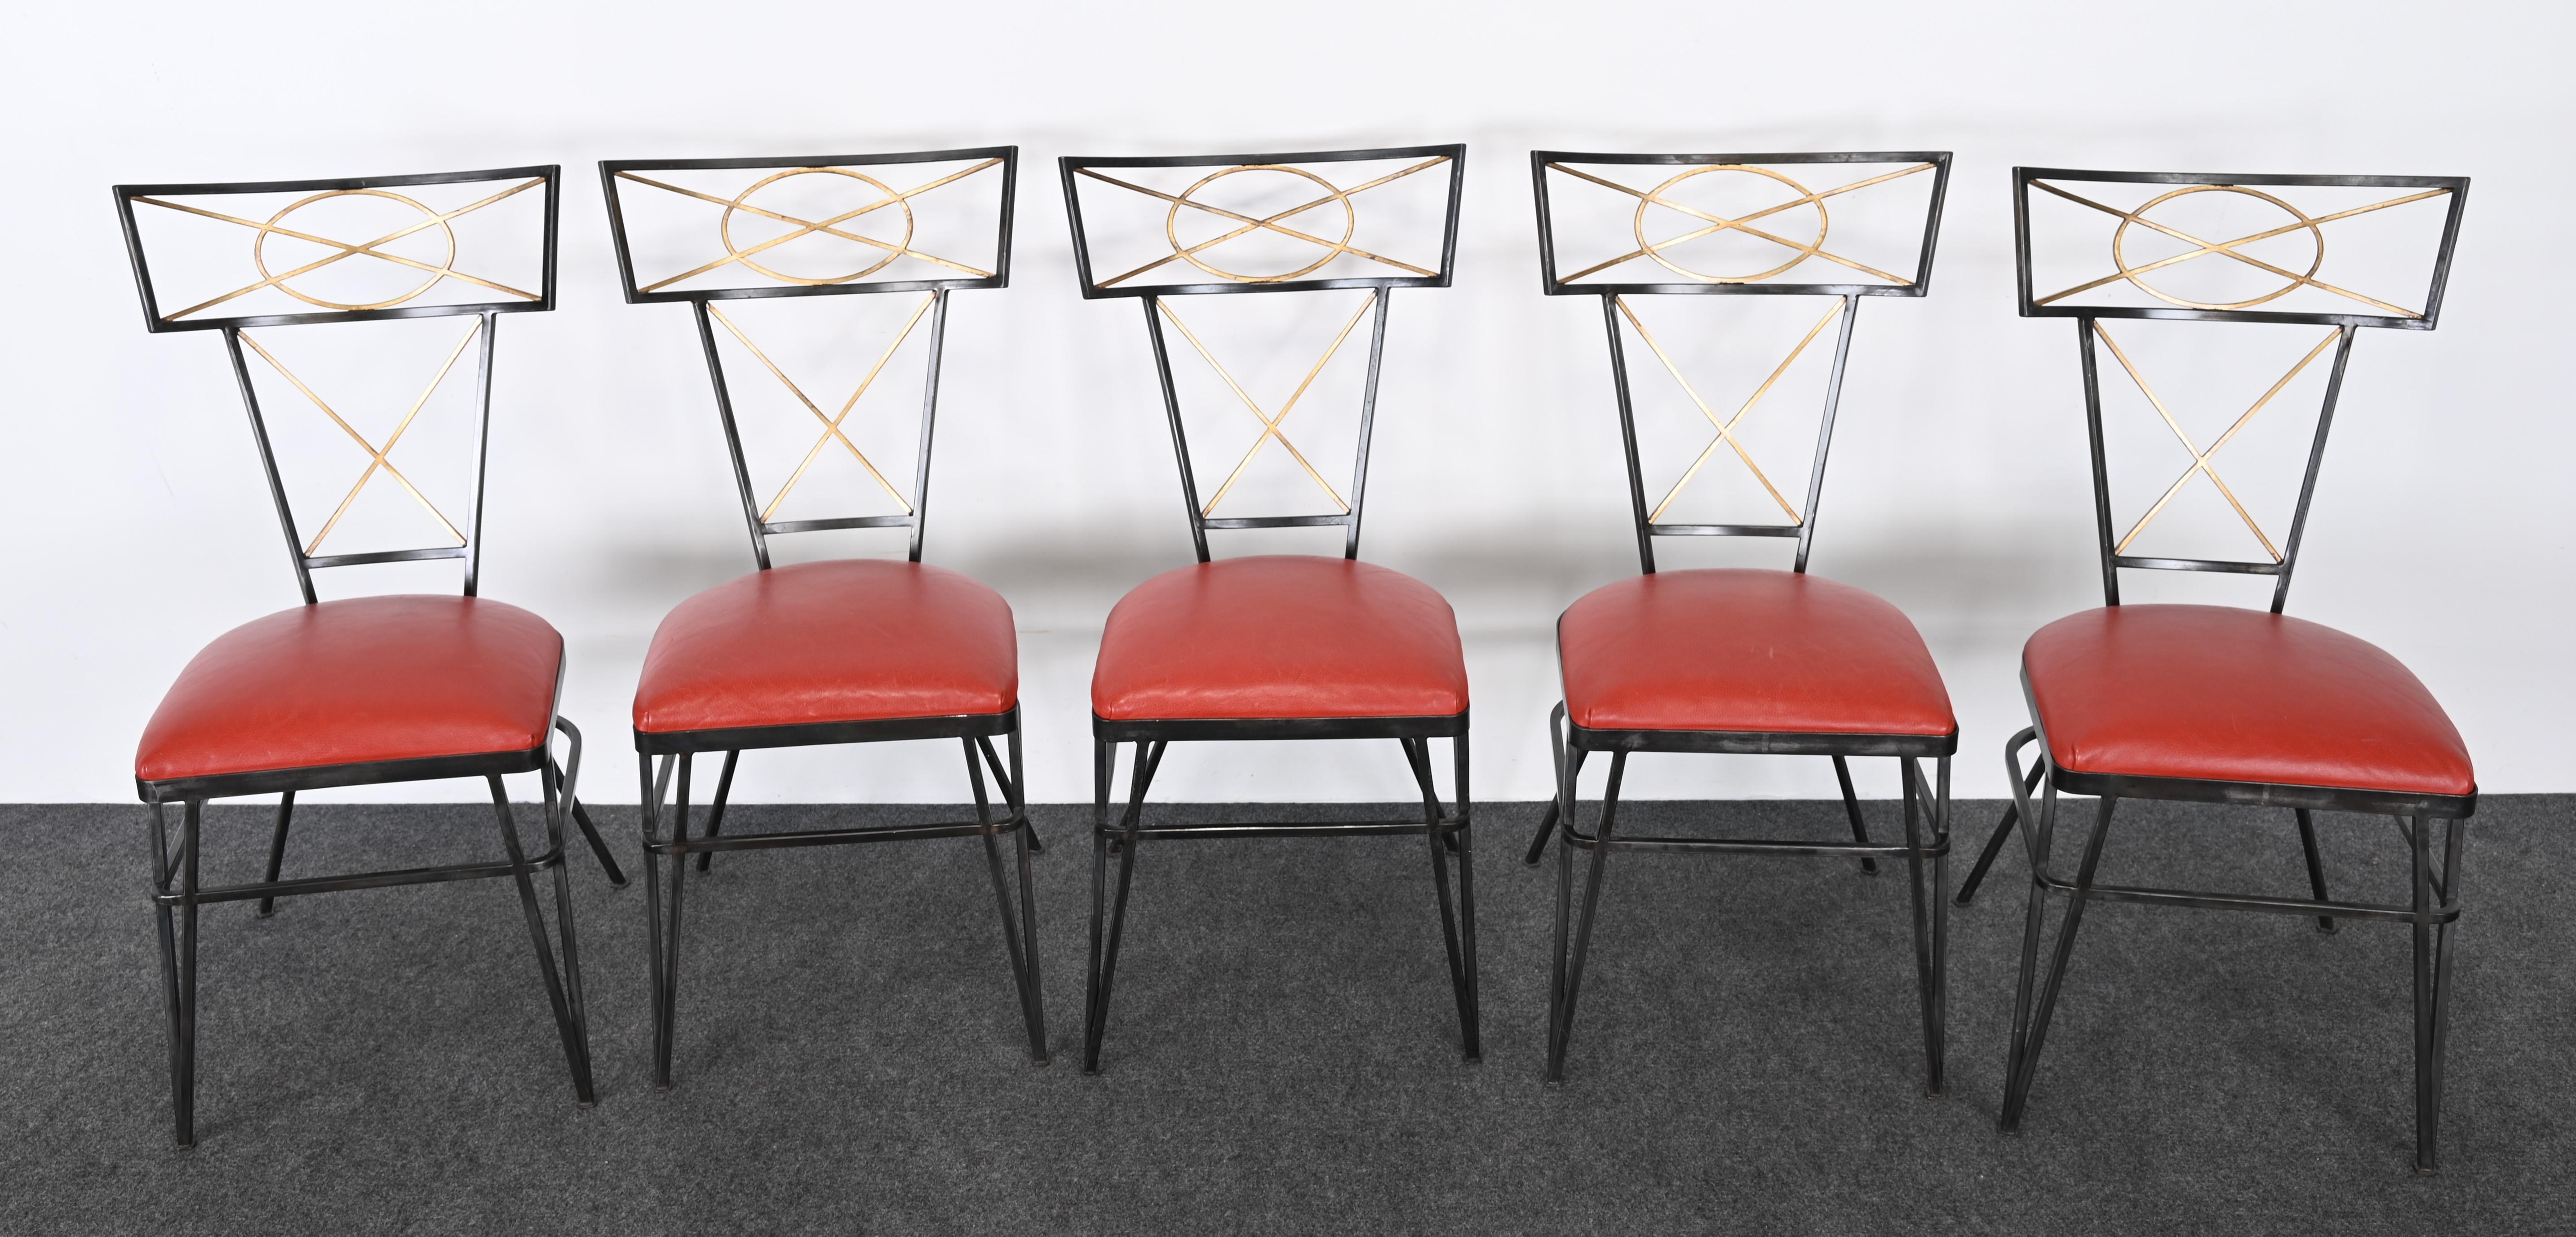 Set of Ten Steel and Gold Gilt Neoclassical Chairs, 20th Century For Sale 5